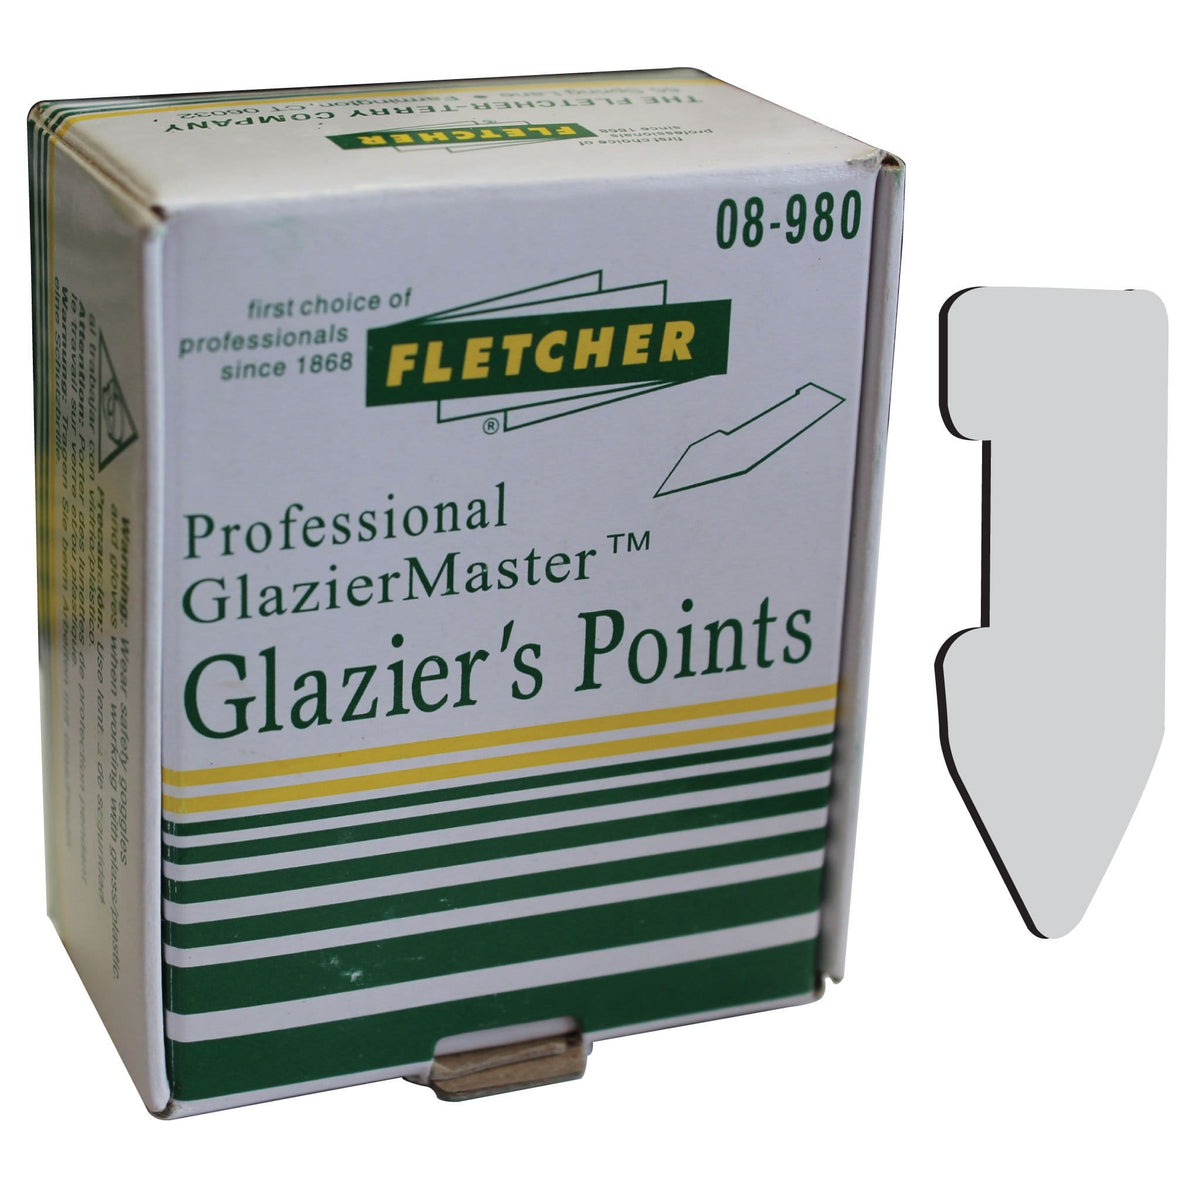 50 Fletcher PUSH POINTS Tabs for Picture Frame Framing / Window Glazing  Glazier